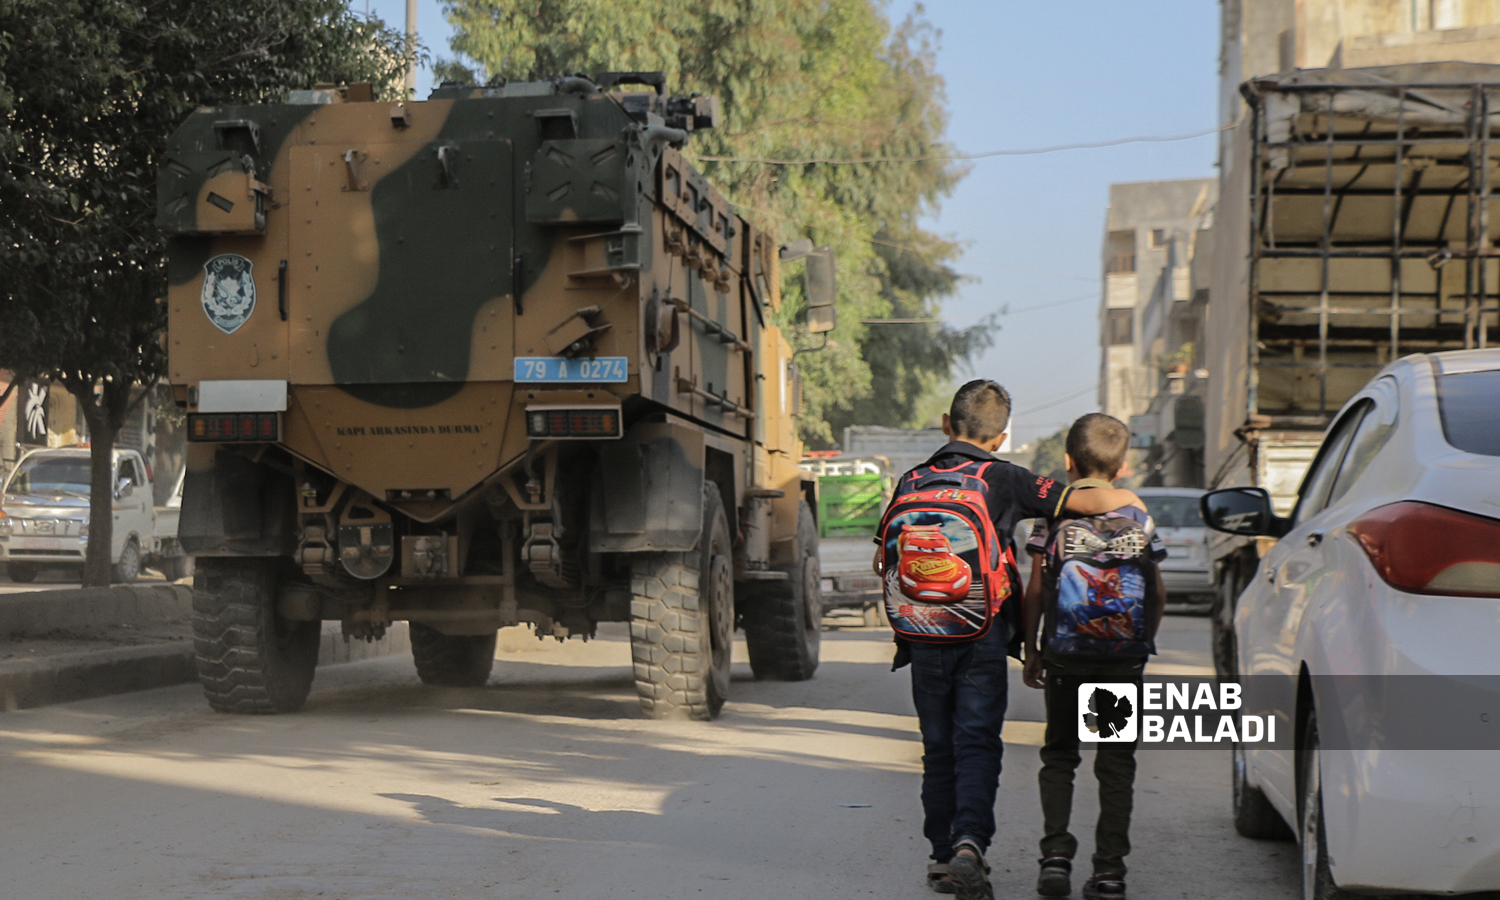 Two primary school students go to school in the morning at the beginning of the new school year in the northern countryside of Aleppo - Azaz city - 22 September 2021 (Enab Baladi / Walid Othman)
